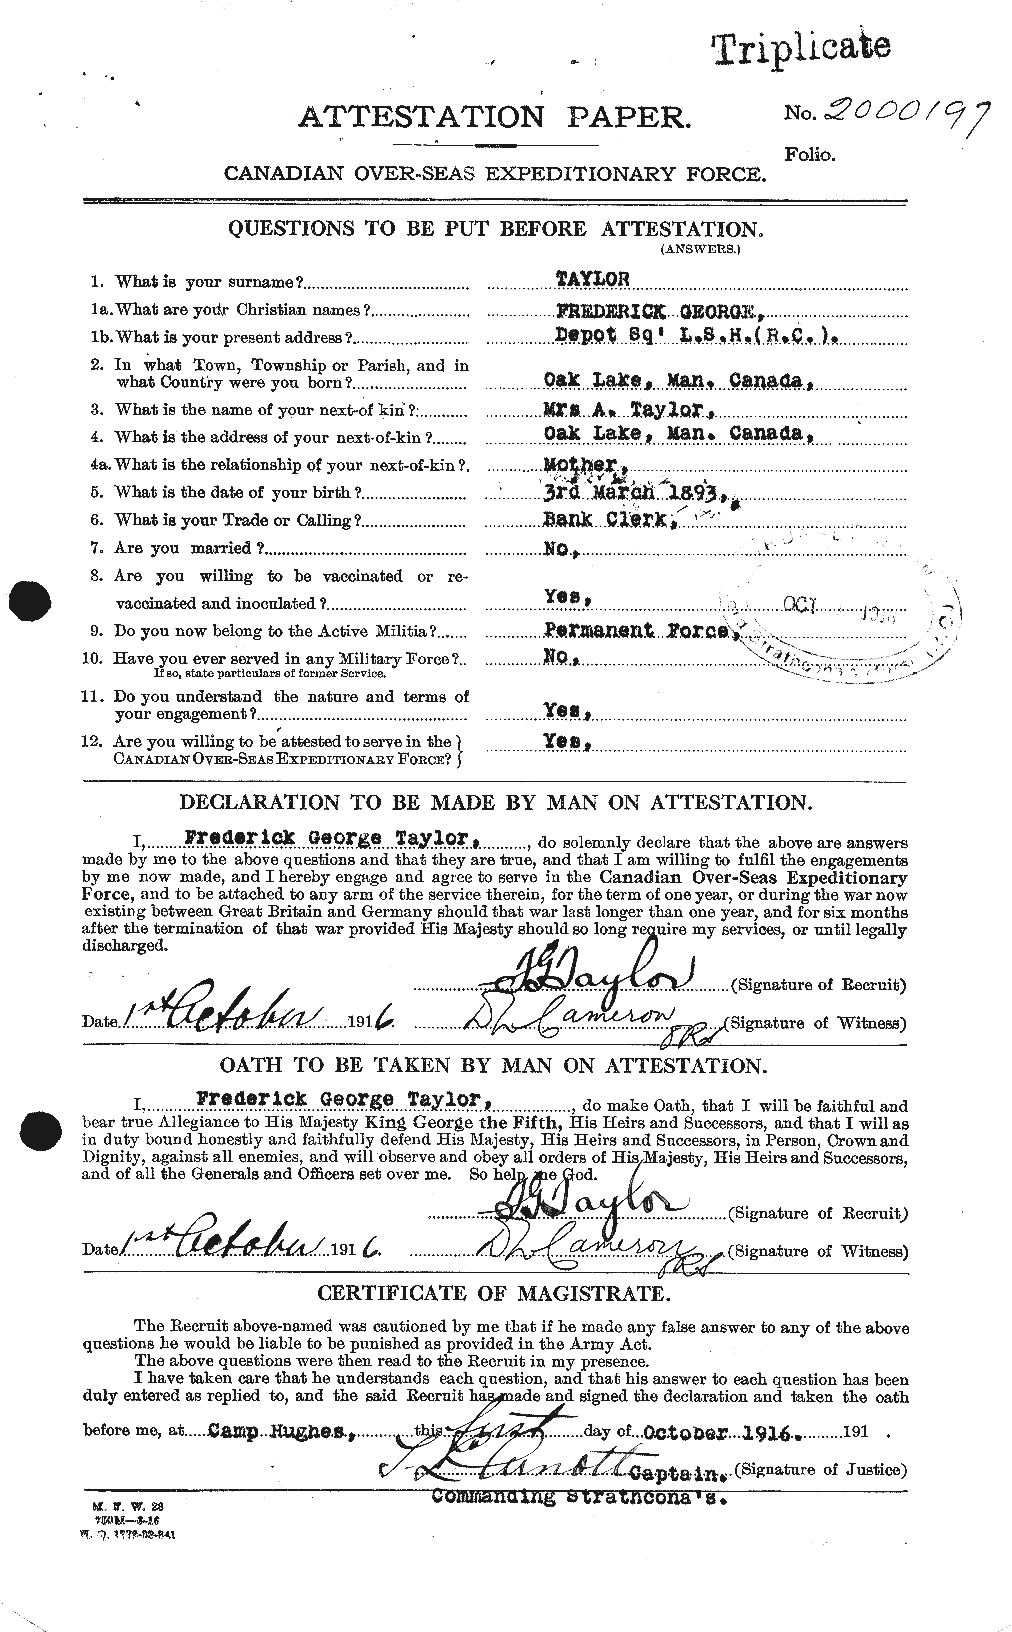 Personnel Records of the First World War - CEF 625800a